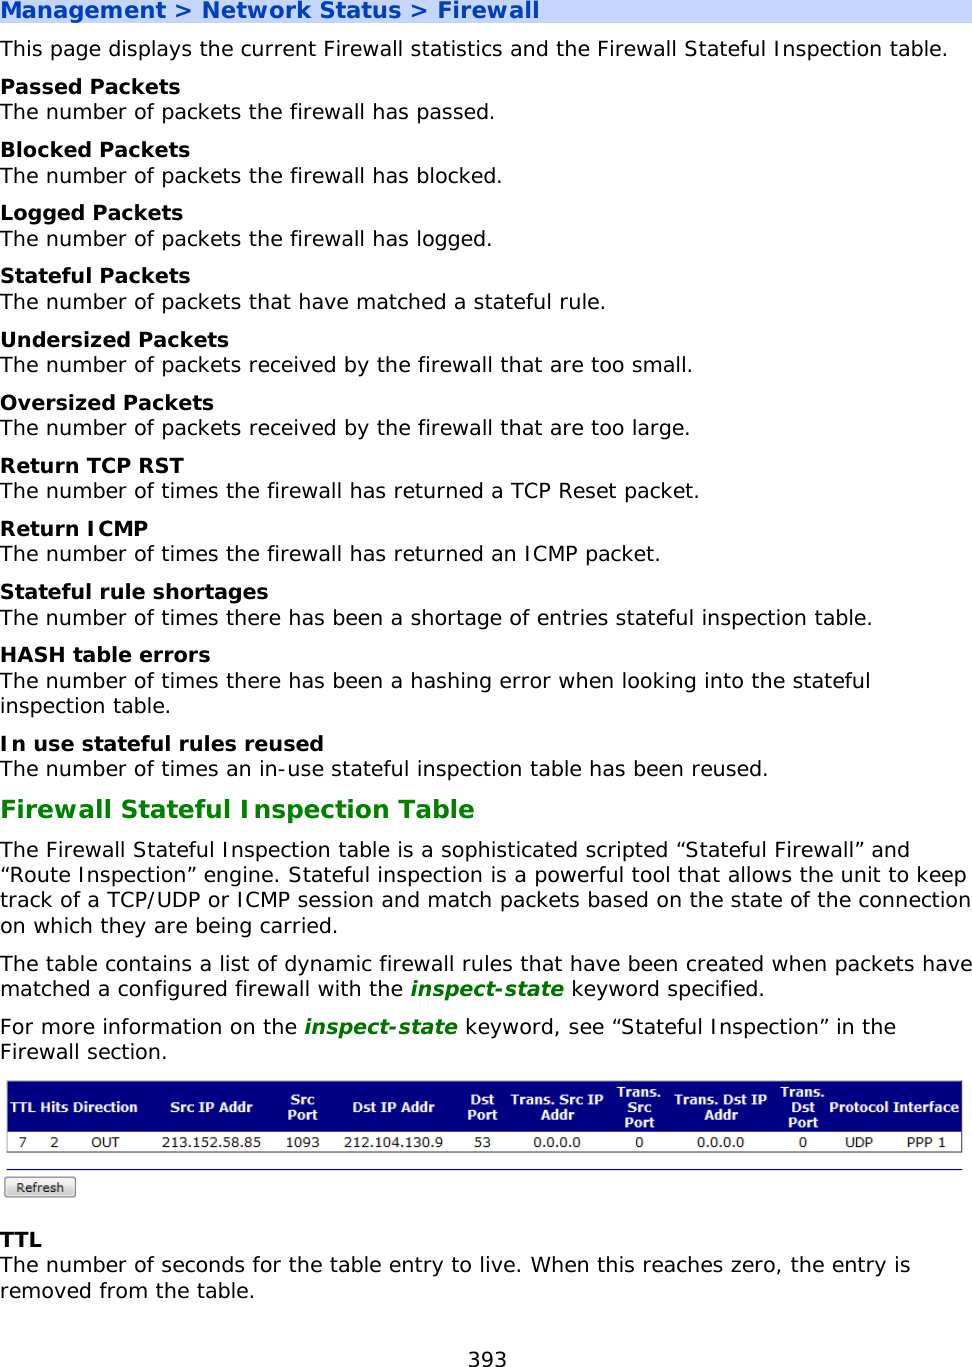 393  Management &gt; Network Status &gt; Firewall This page displays the current Firewall statistics and the Firewall Stateful Inspection table.  Passed Packets The number of packets the firewall has passed. Blocked Packets The number of packets the firewall has blocked. Logged Packets The number of packets the firewall has logged. Stateful Packets The number of packets that have matched a stateful rule. Undersized Packets The number of packets received by the firewall that are too small. Oversized Packets The number of packets received by the firewall that are too large. Return TCP RST The number of times the firewall has returned a TCP Reset packet. Return ICMP The number of times the firewall has returned an ICMP packet. Stateful rule shortages The number of times there has been a shortage of entries stateful inspection table. HASH table errors The number of times there has been a hashing error when looking into the stateful inspection table. In use stateful rules reused The number of times an in-use stateful inspection table has been reused. Firewall Stateful Inspection Table The Firewall Stateful Inspection table is a sophisticated scripted “Stateful Firewall” and “Route Inspection” engine. Stateful inspection is a powerful tool that allows the unit to keep track of a TCP/UDP or ICMP session and match packets based on the state of the connection on which they are being carried. The table contains a list of dynamic firewall rules that have been created when packets have matched a configured firewall with the inspect-state keyword specified. For more information on the inspect-state keyword, see “Stateful Inspection” in the Firewall section.  TTL The number of seconds for the table entry to live. When this reaches zero, the entry is removed from the table. 